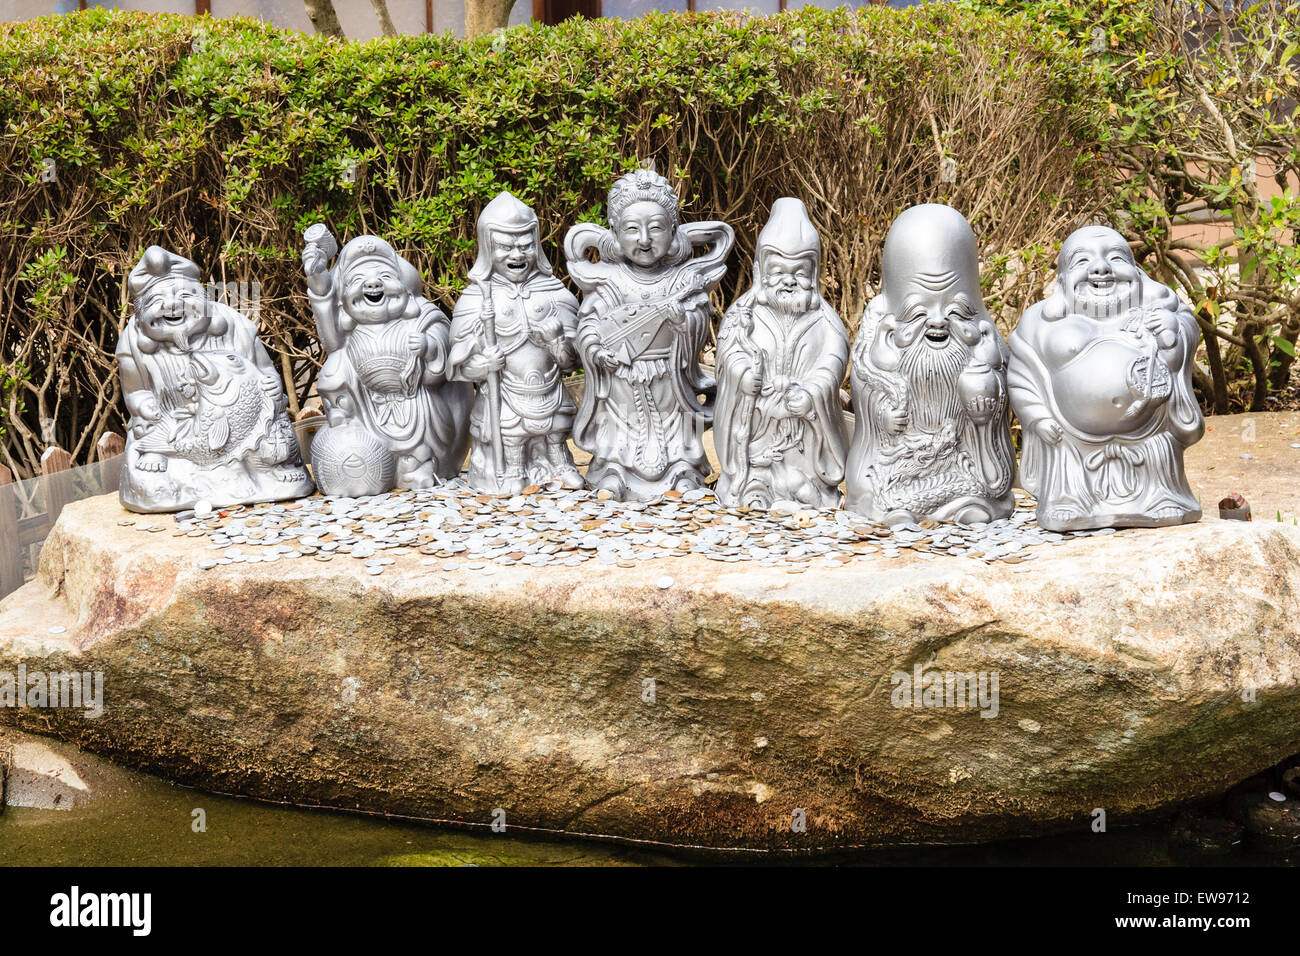 Japan, Miyajima. Daisho-in temple. Statues of the Japanese seven deities of good fortune outdoors in a line with pile of coins left as offerings. Stock Photo